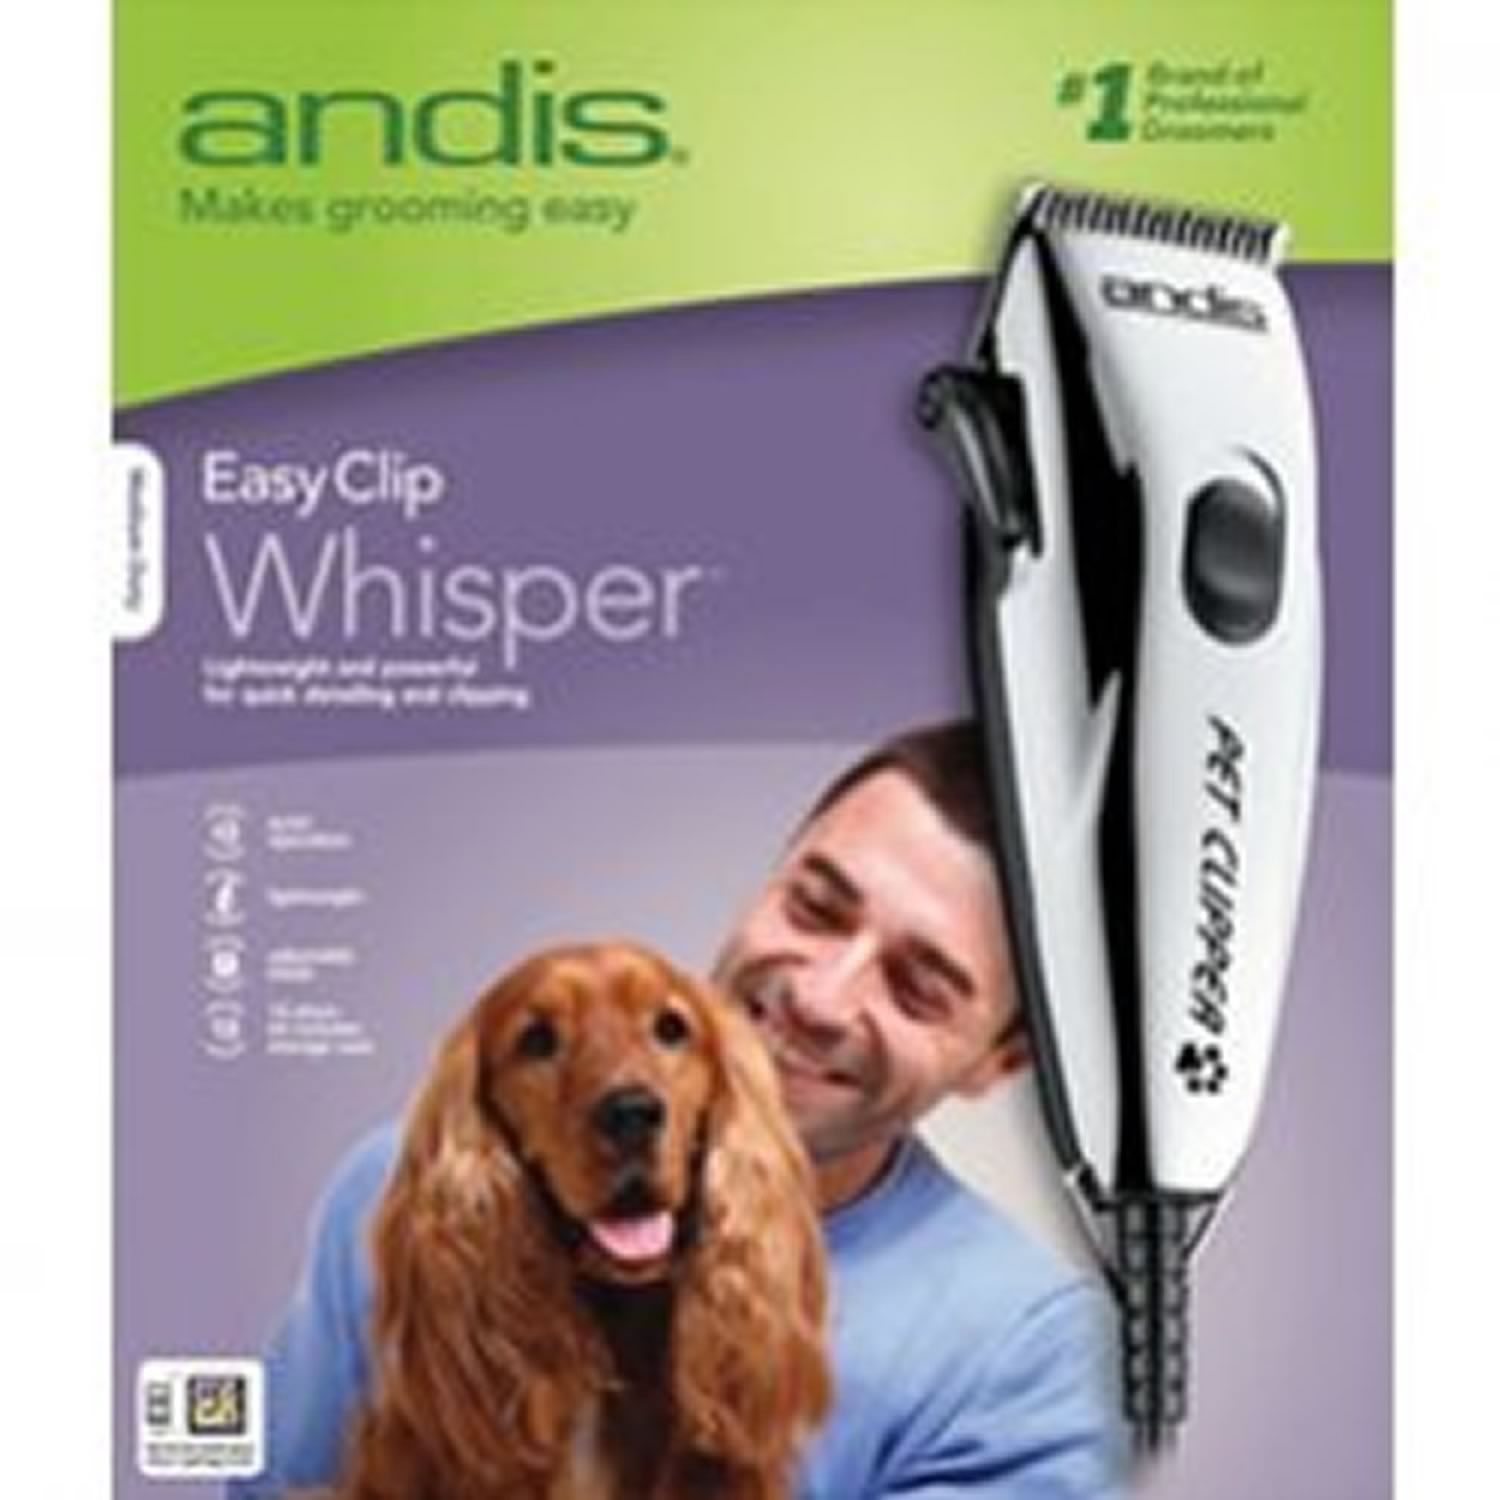 Andis Cordless Dog Nail Grinder Review - Is It Better than Nail Clippers?